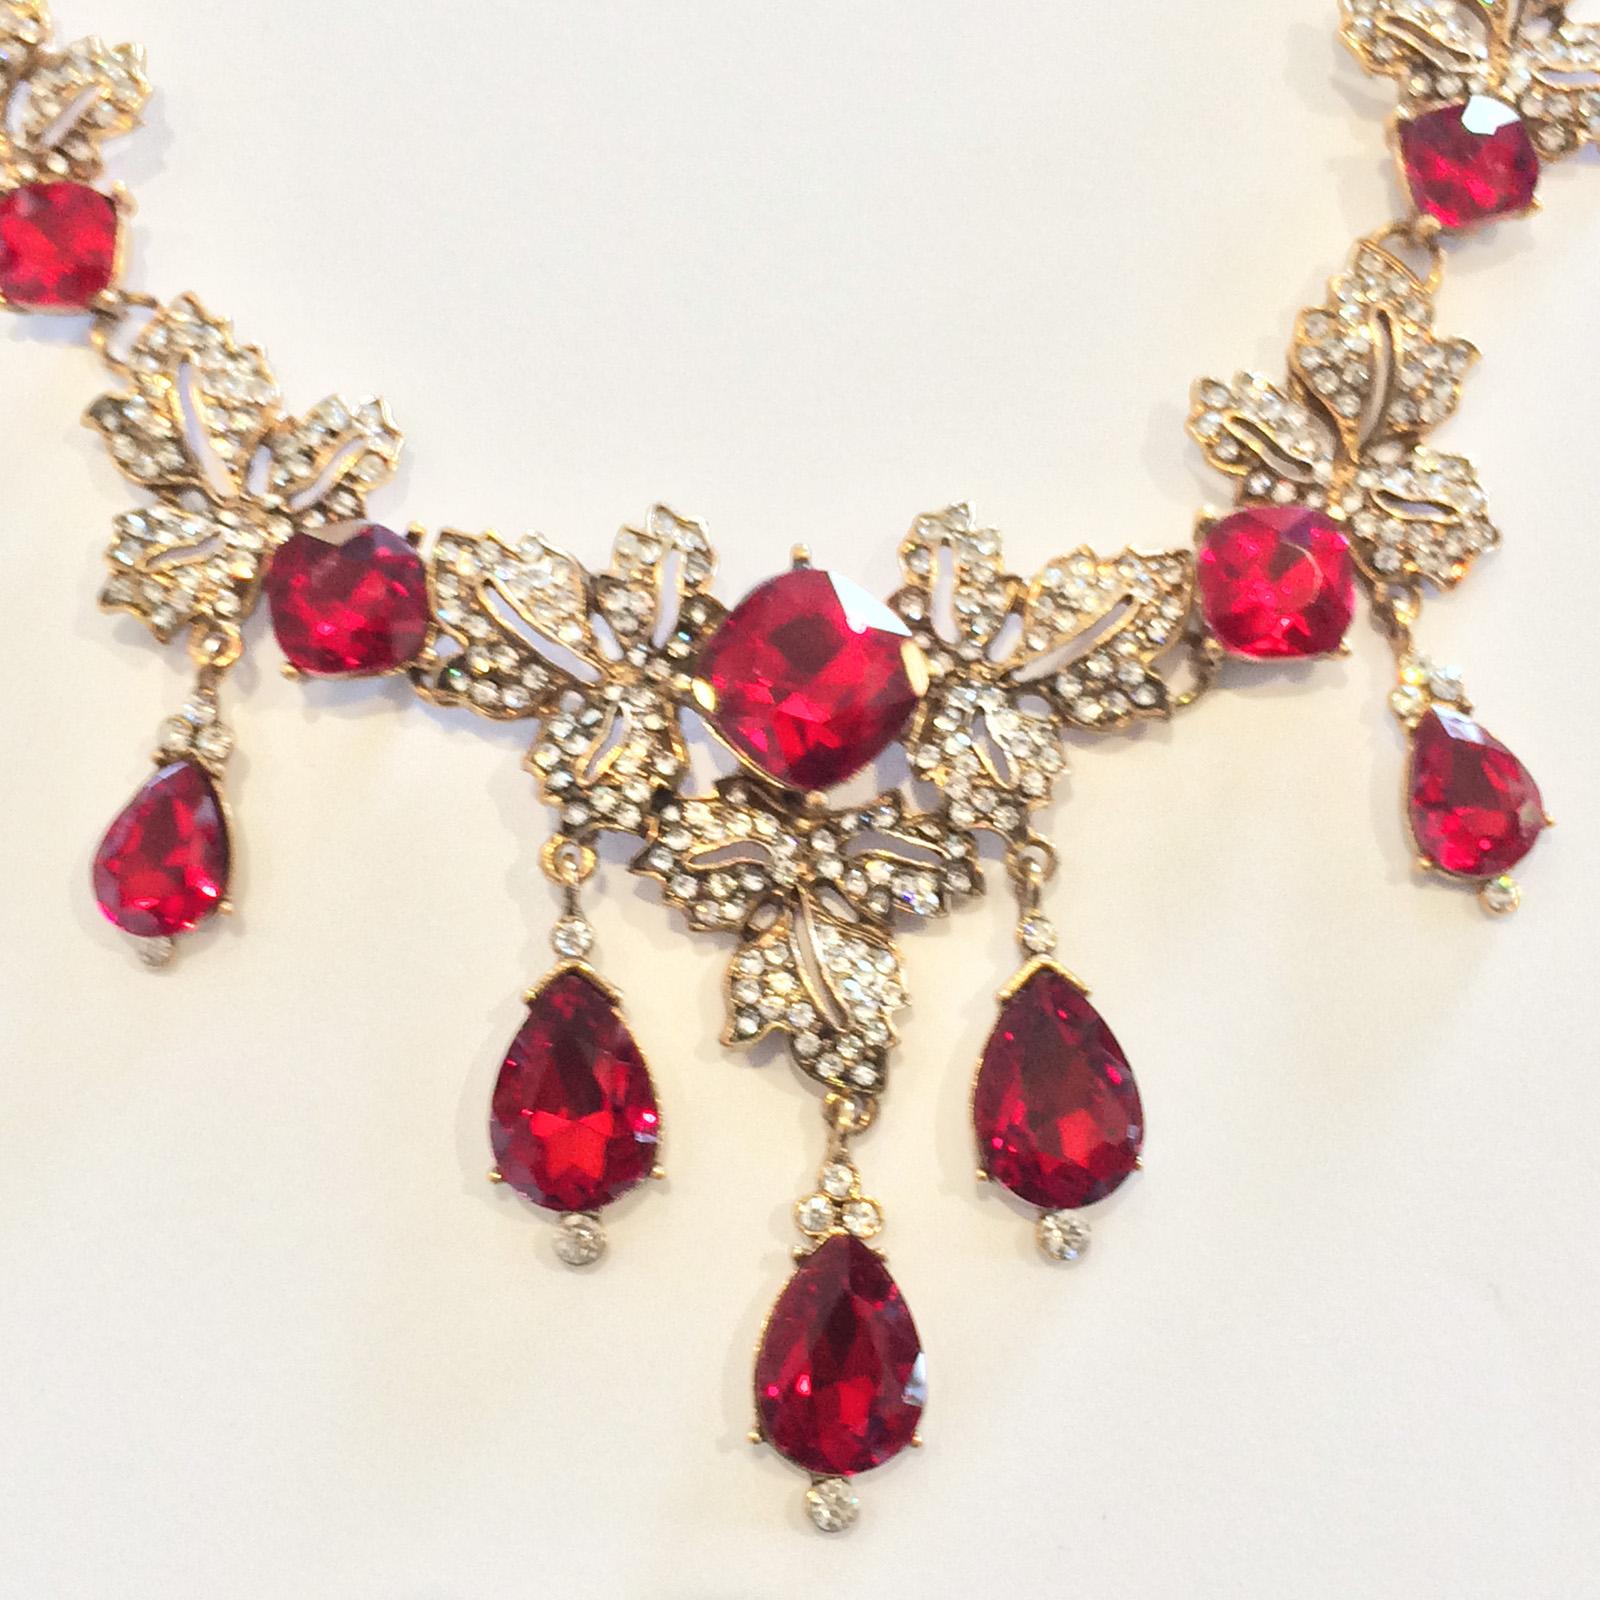 Authentic Oscar De La Renta Necklace highlighted in brilliant, Ruby Red, huge Diamantes, with white diamantes set to Gilt Leaves. An outstanding piece designed to attract the eyes. Extremely fine attention to detail, and retaining the Gilt Lobster